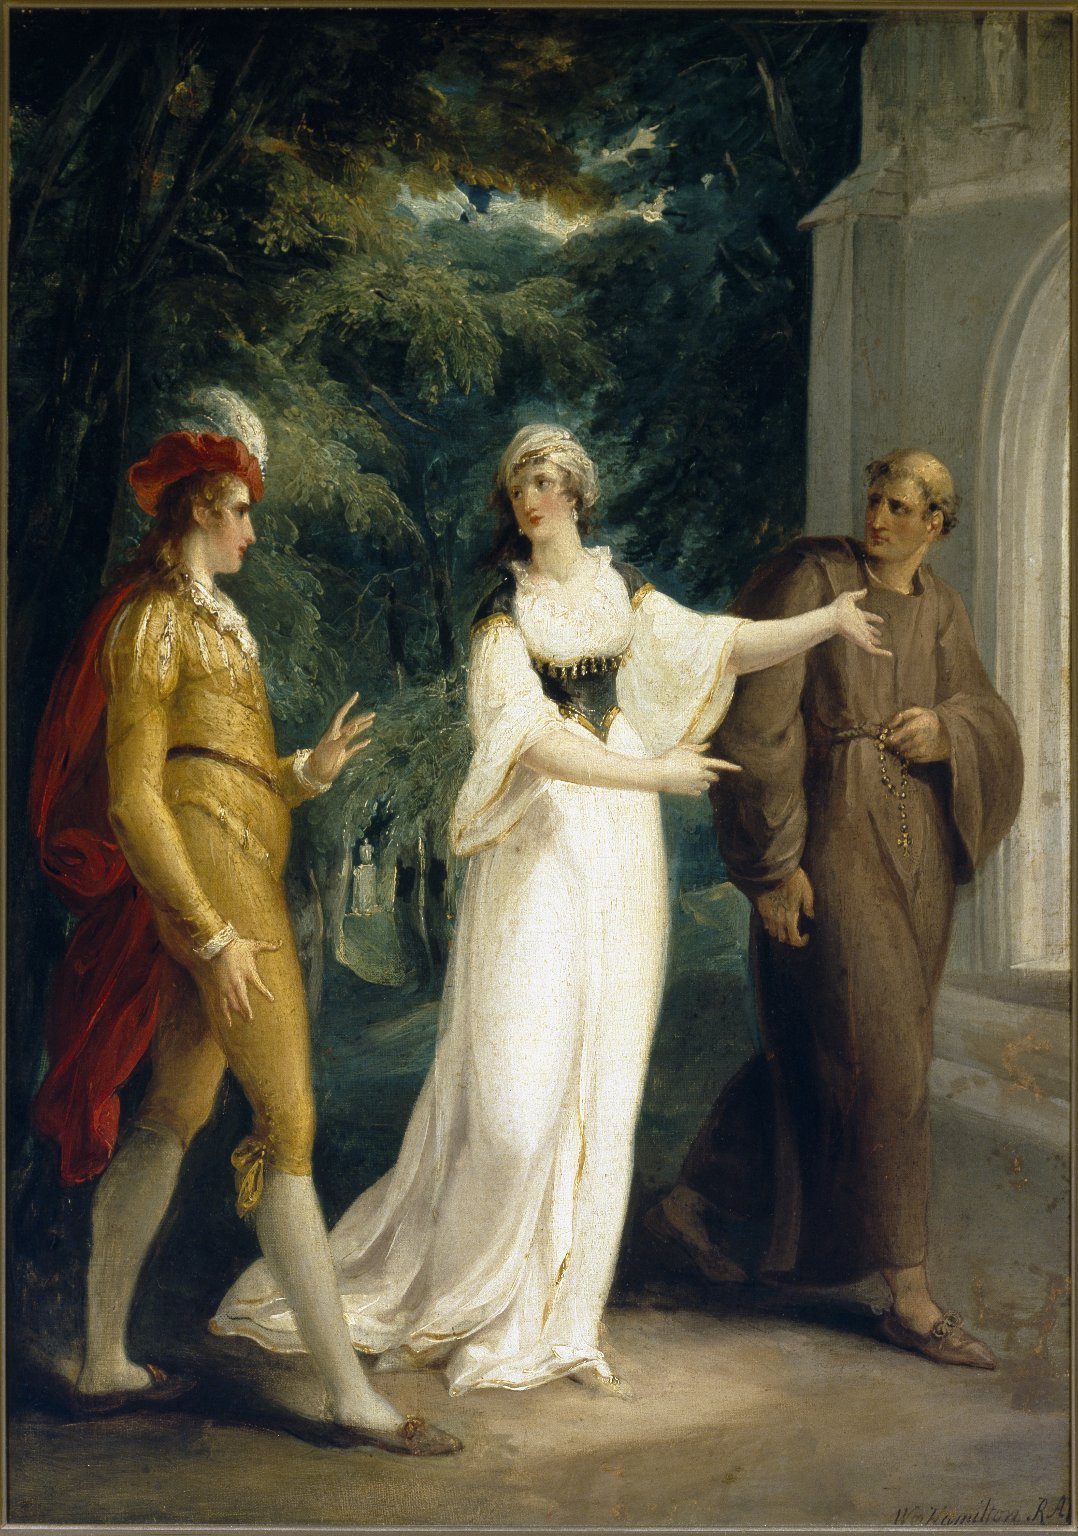 A woman stands between two men in the light of an entrance in front of a forested area.